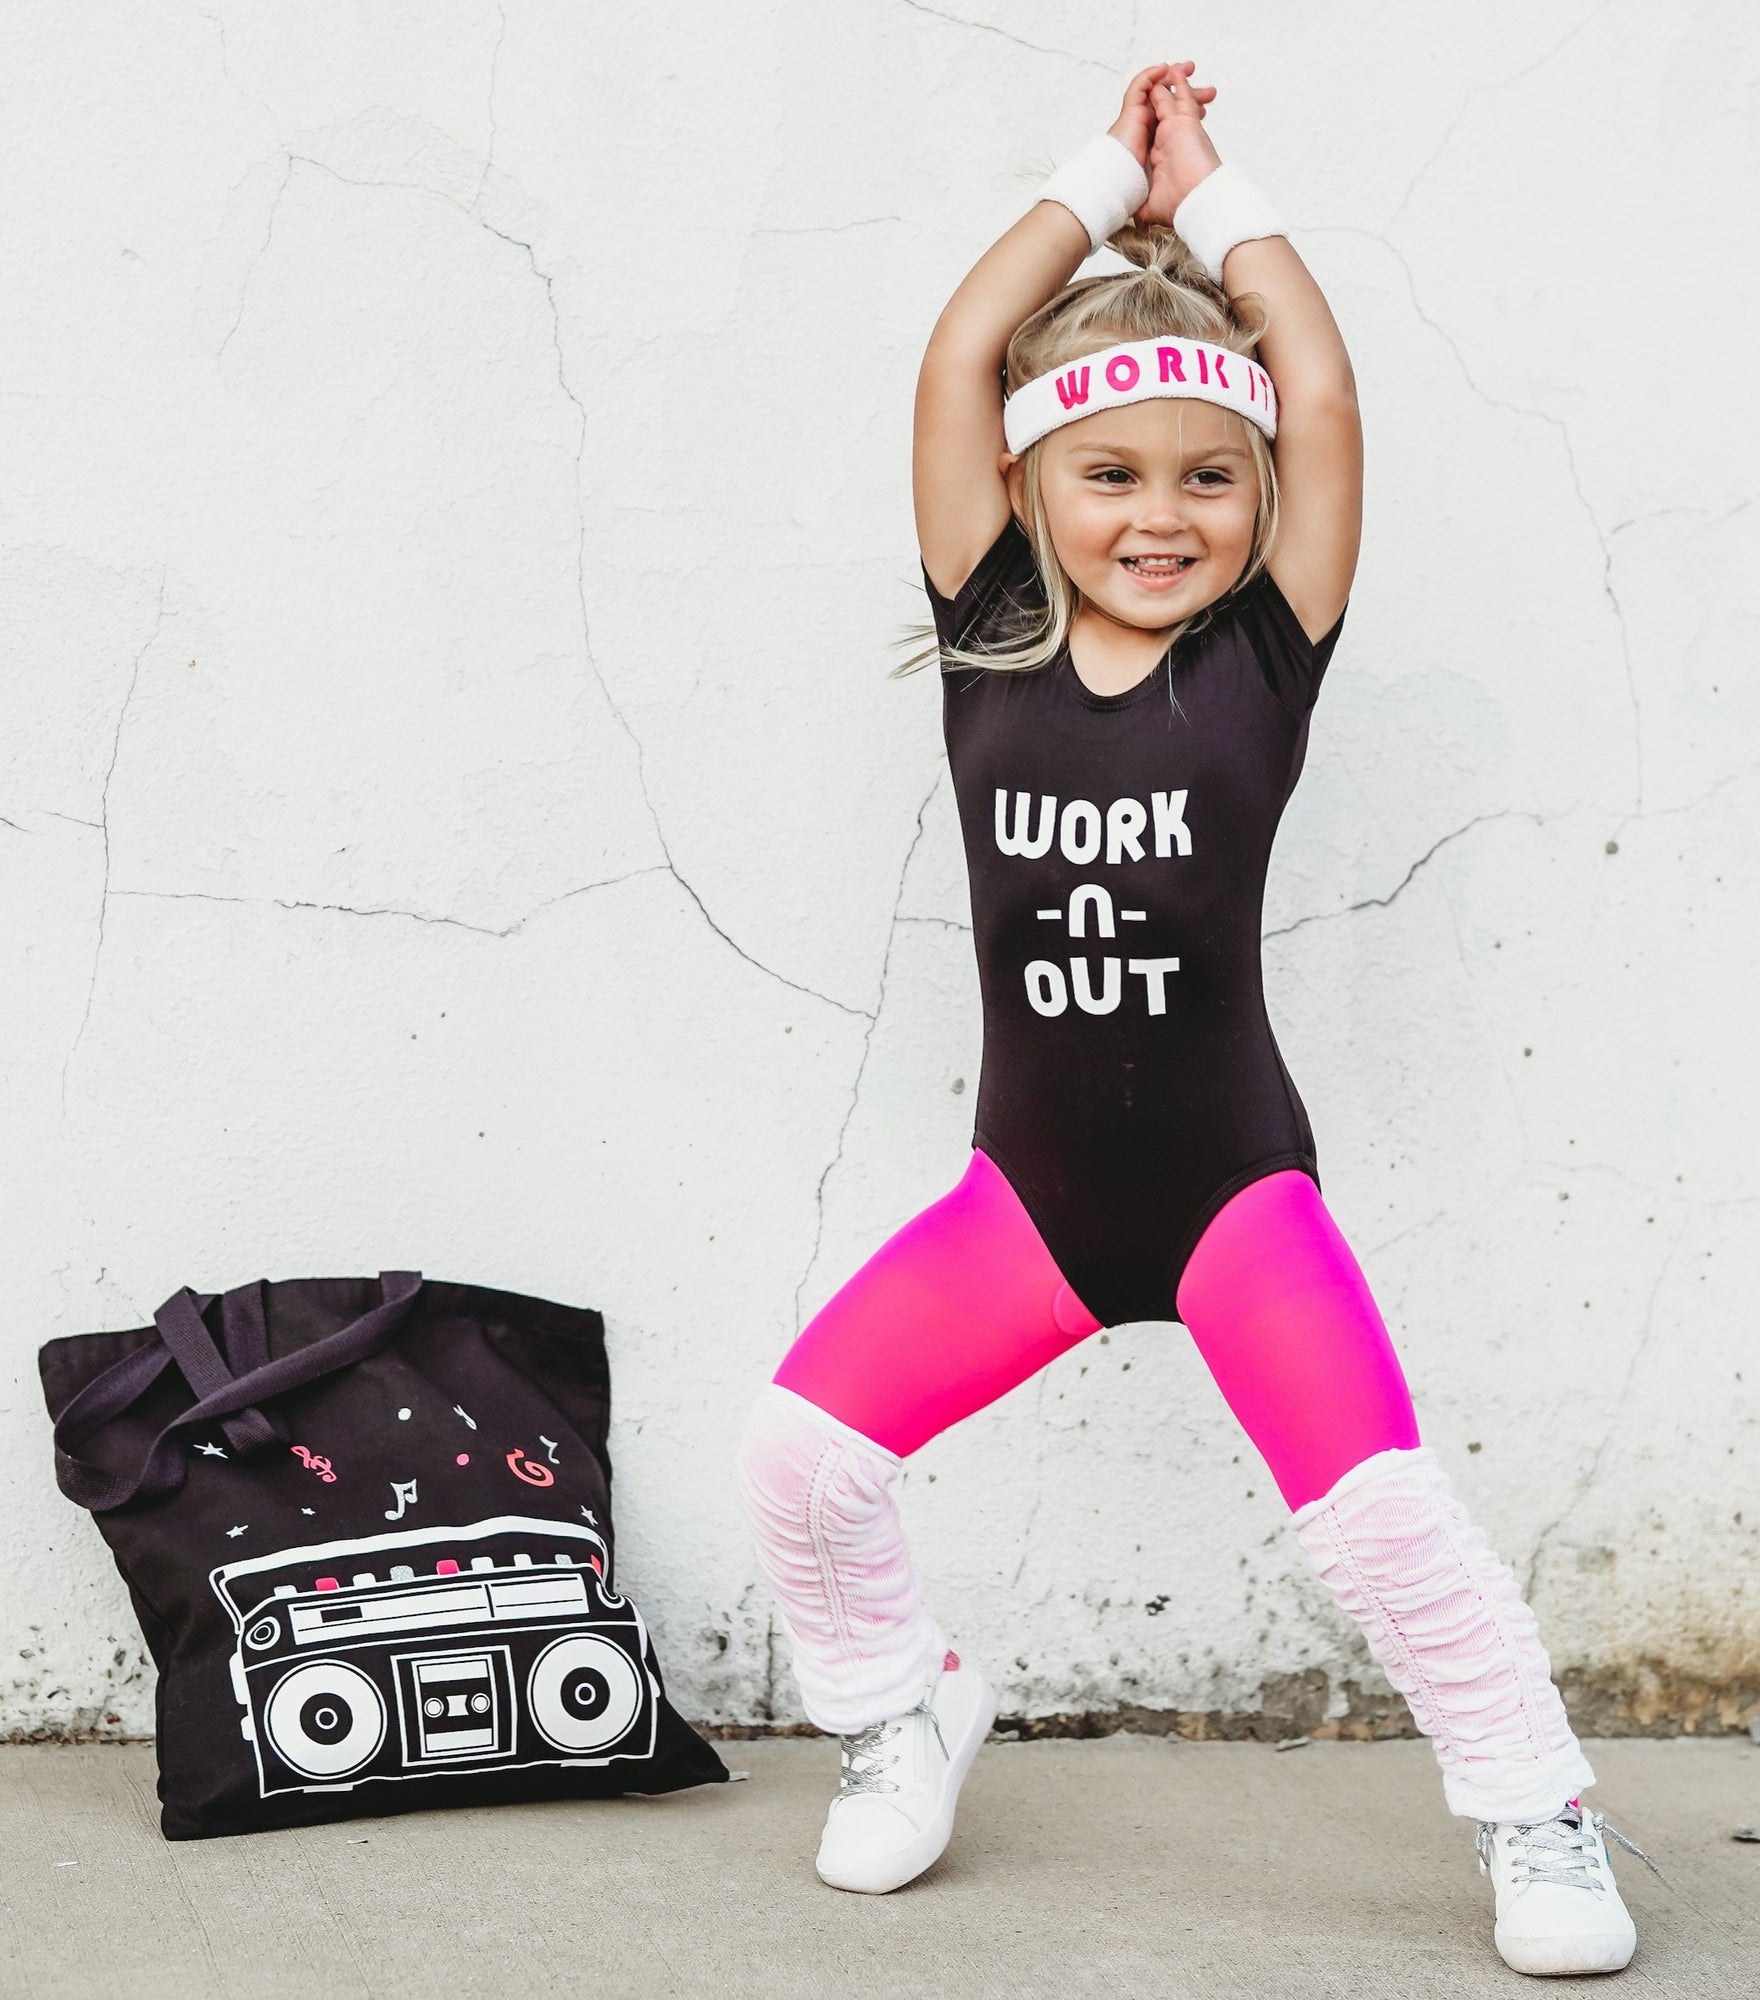 80's Workout Costume for Girls